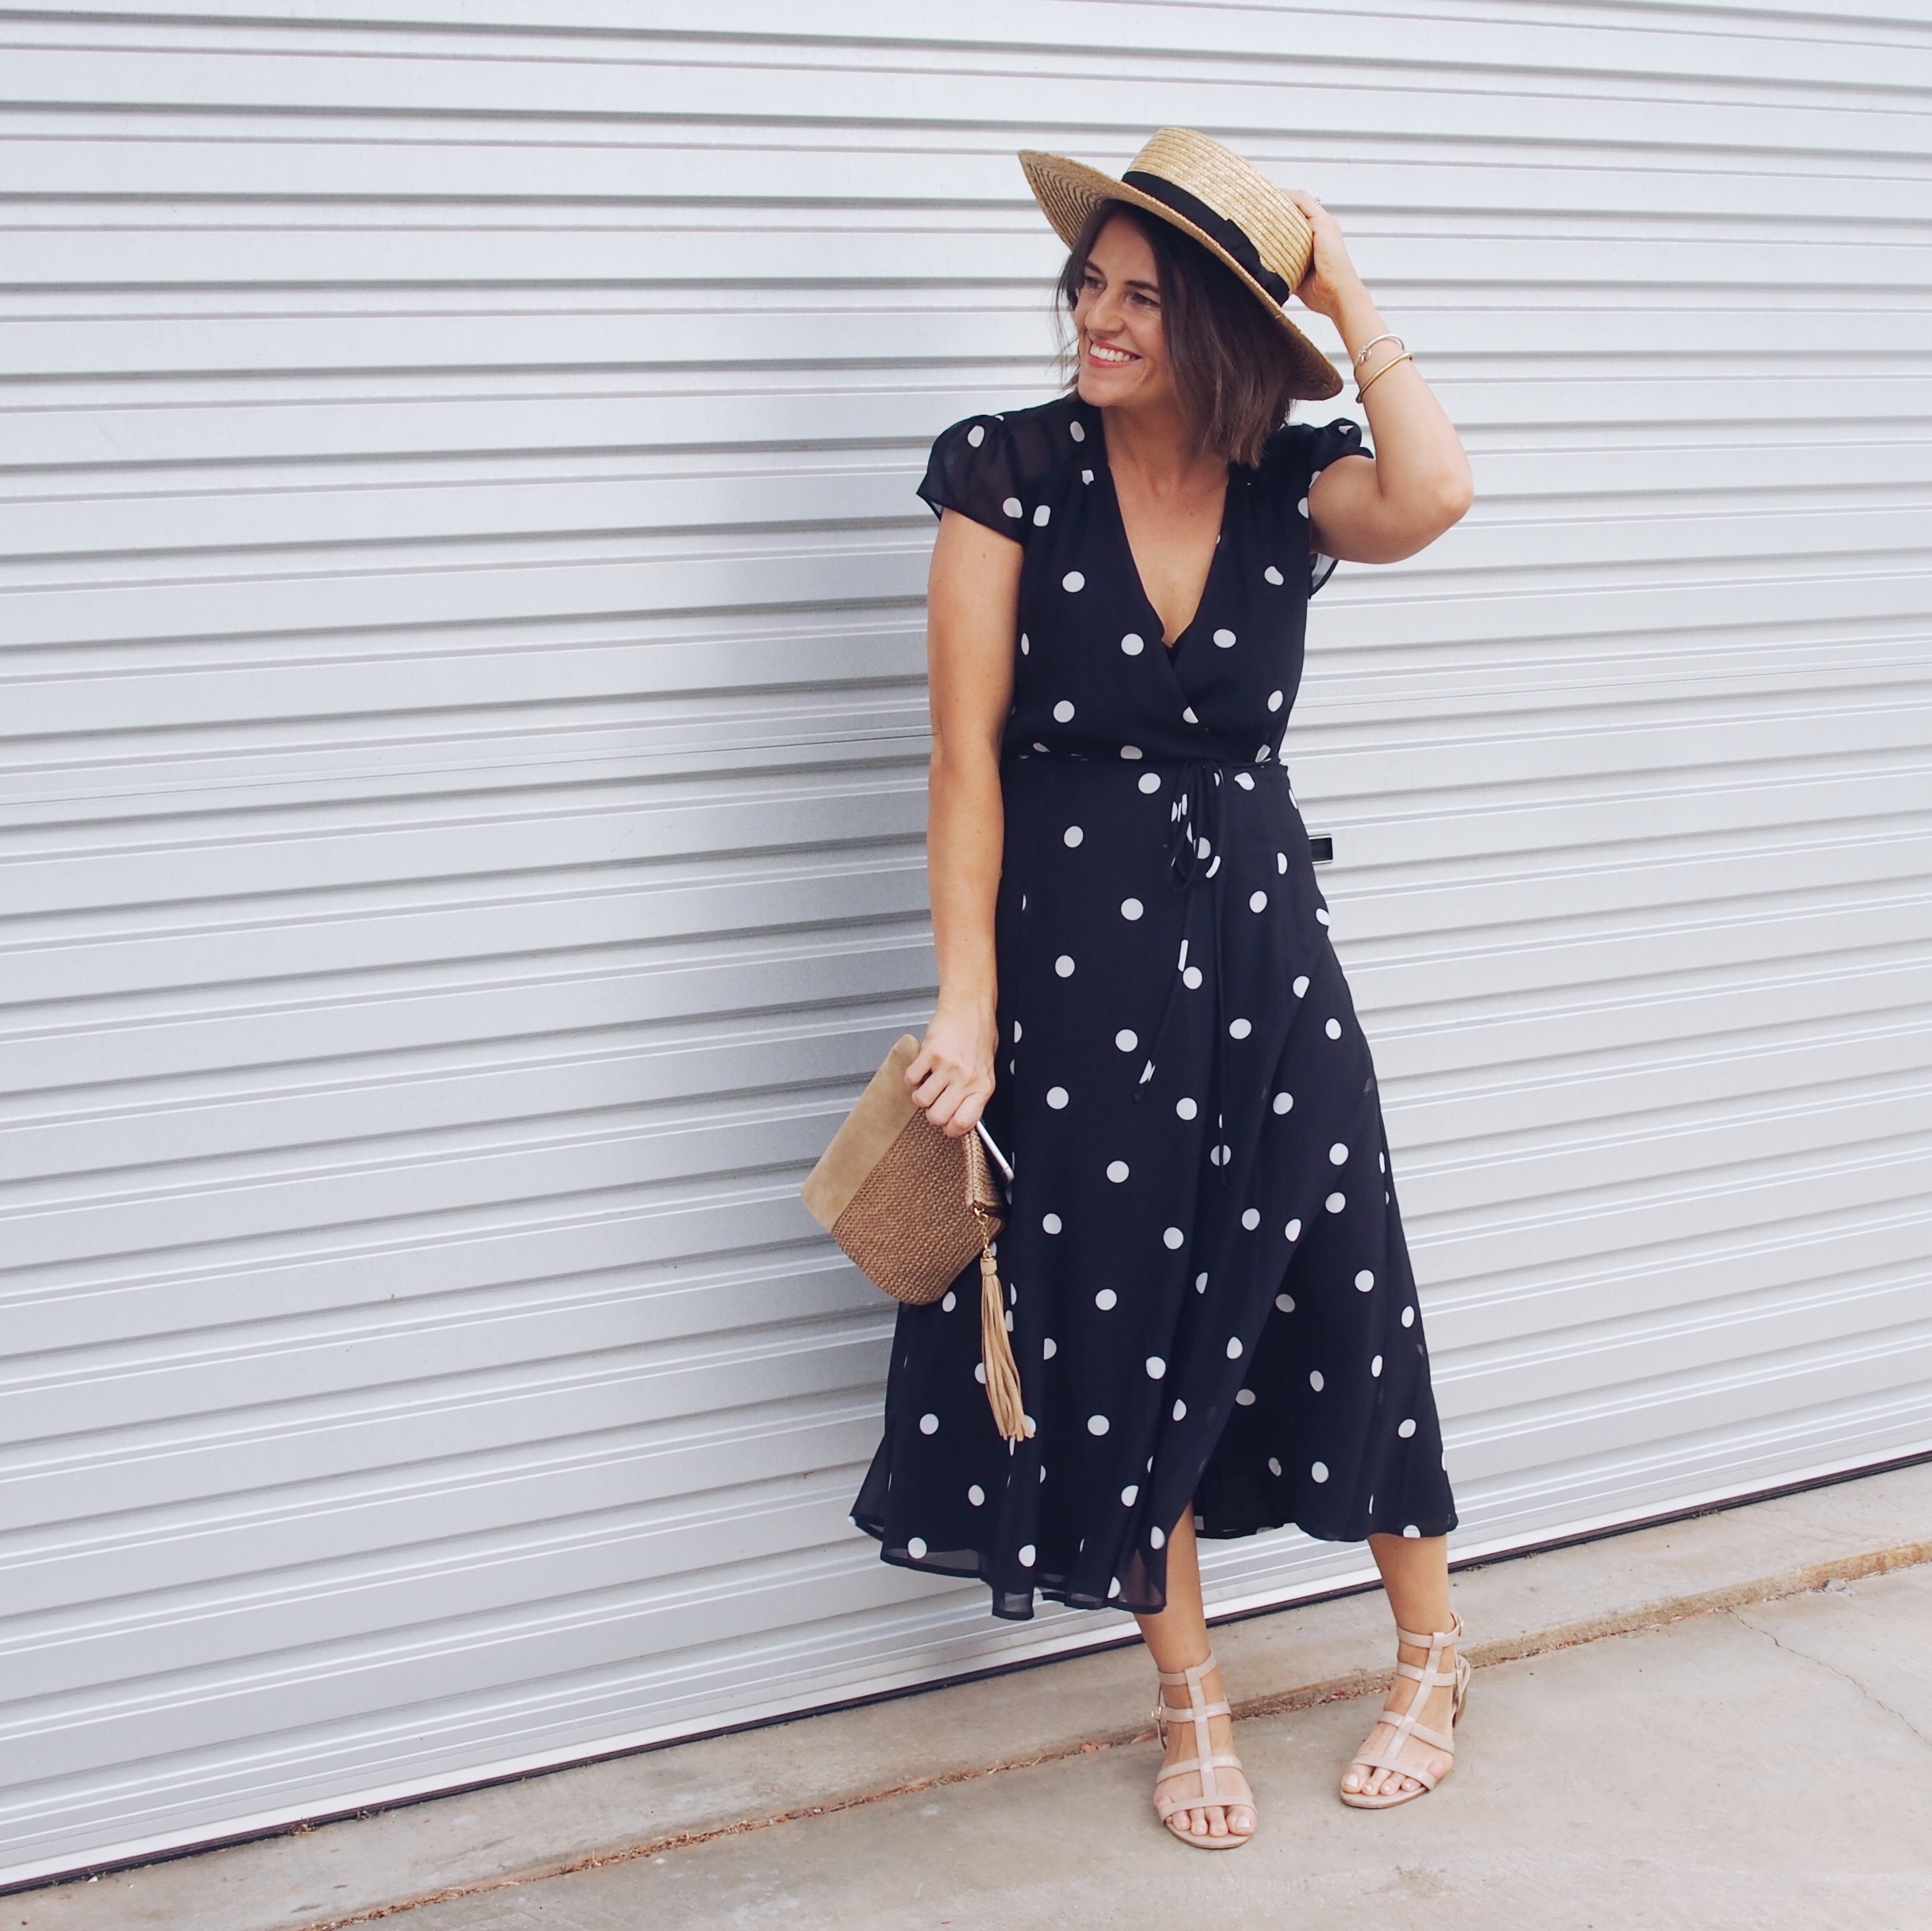 4 Affordable Melbourne Cup Outfit Ideas | Spring Racing - Pretty Chuffed